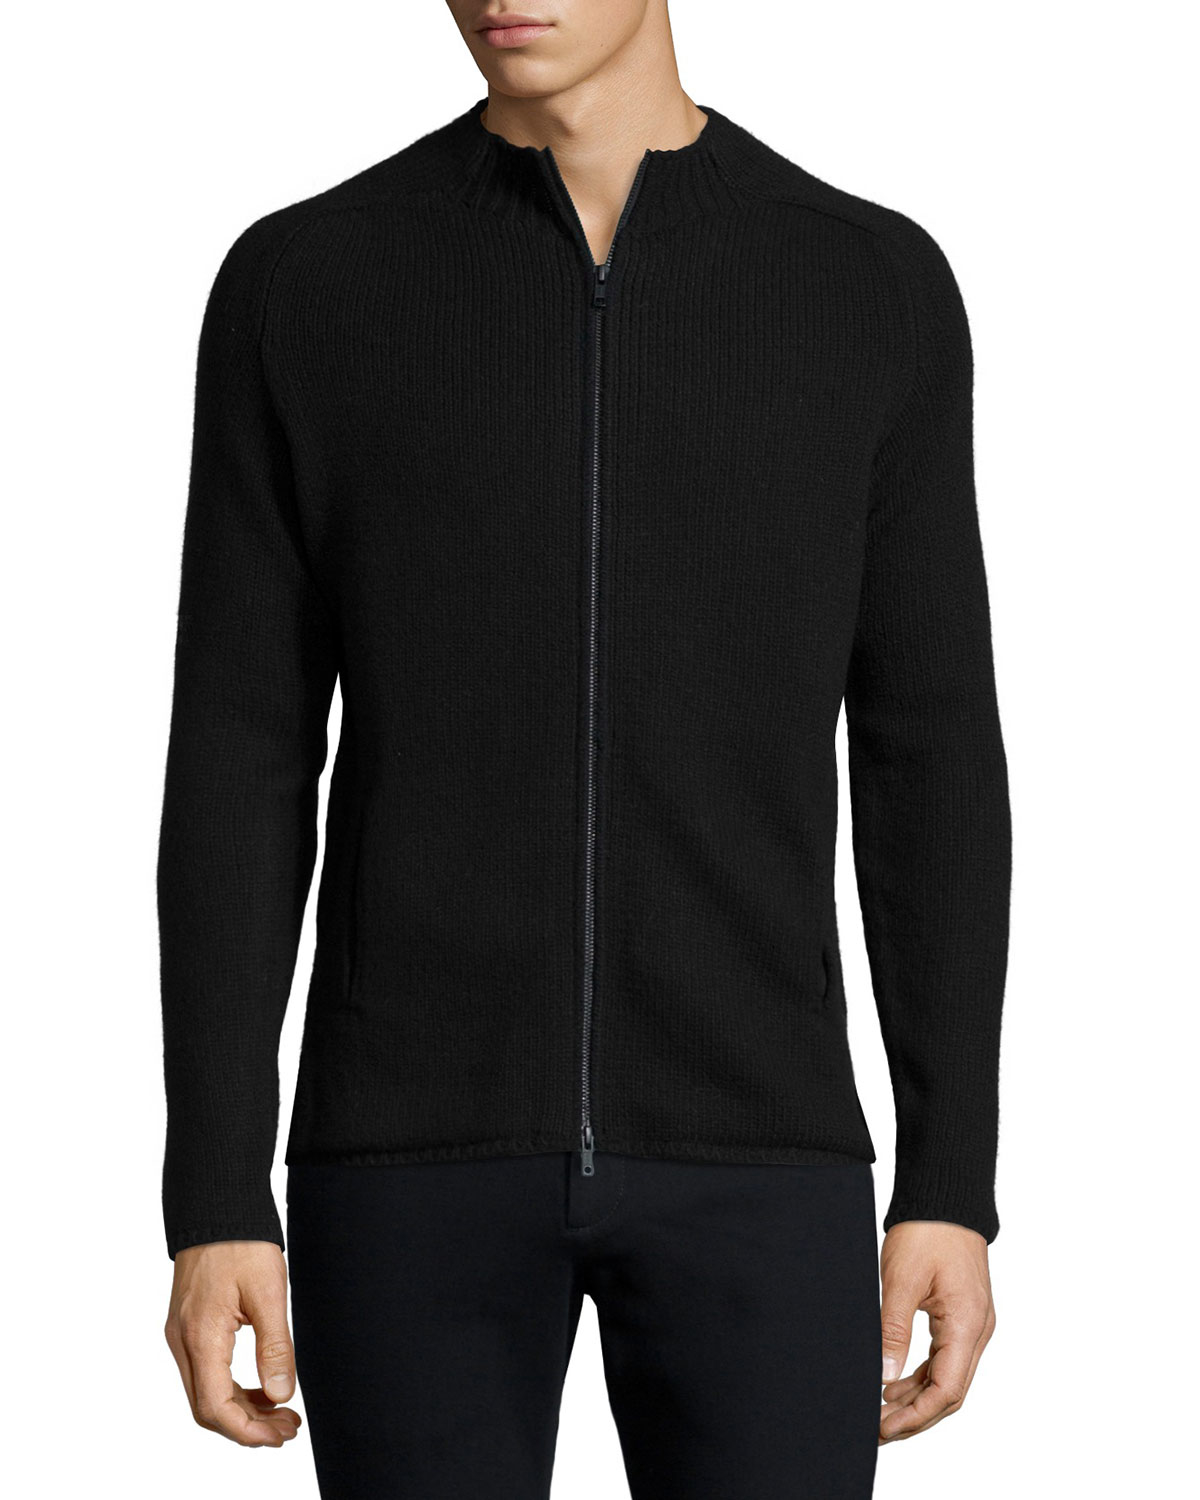 ATM Ribbed Full-zip Sweater in Charcoal (Black) for Men - Lyst